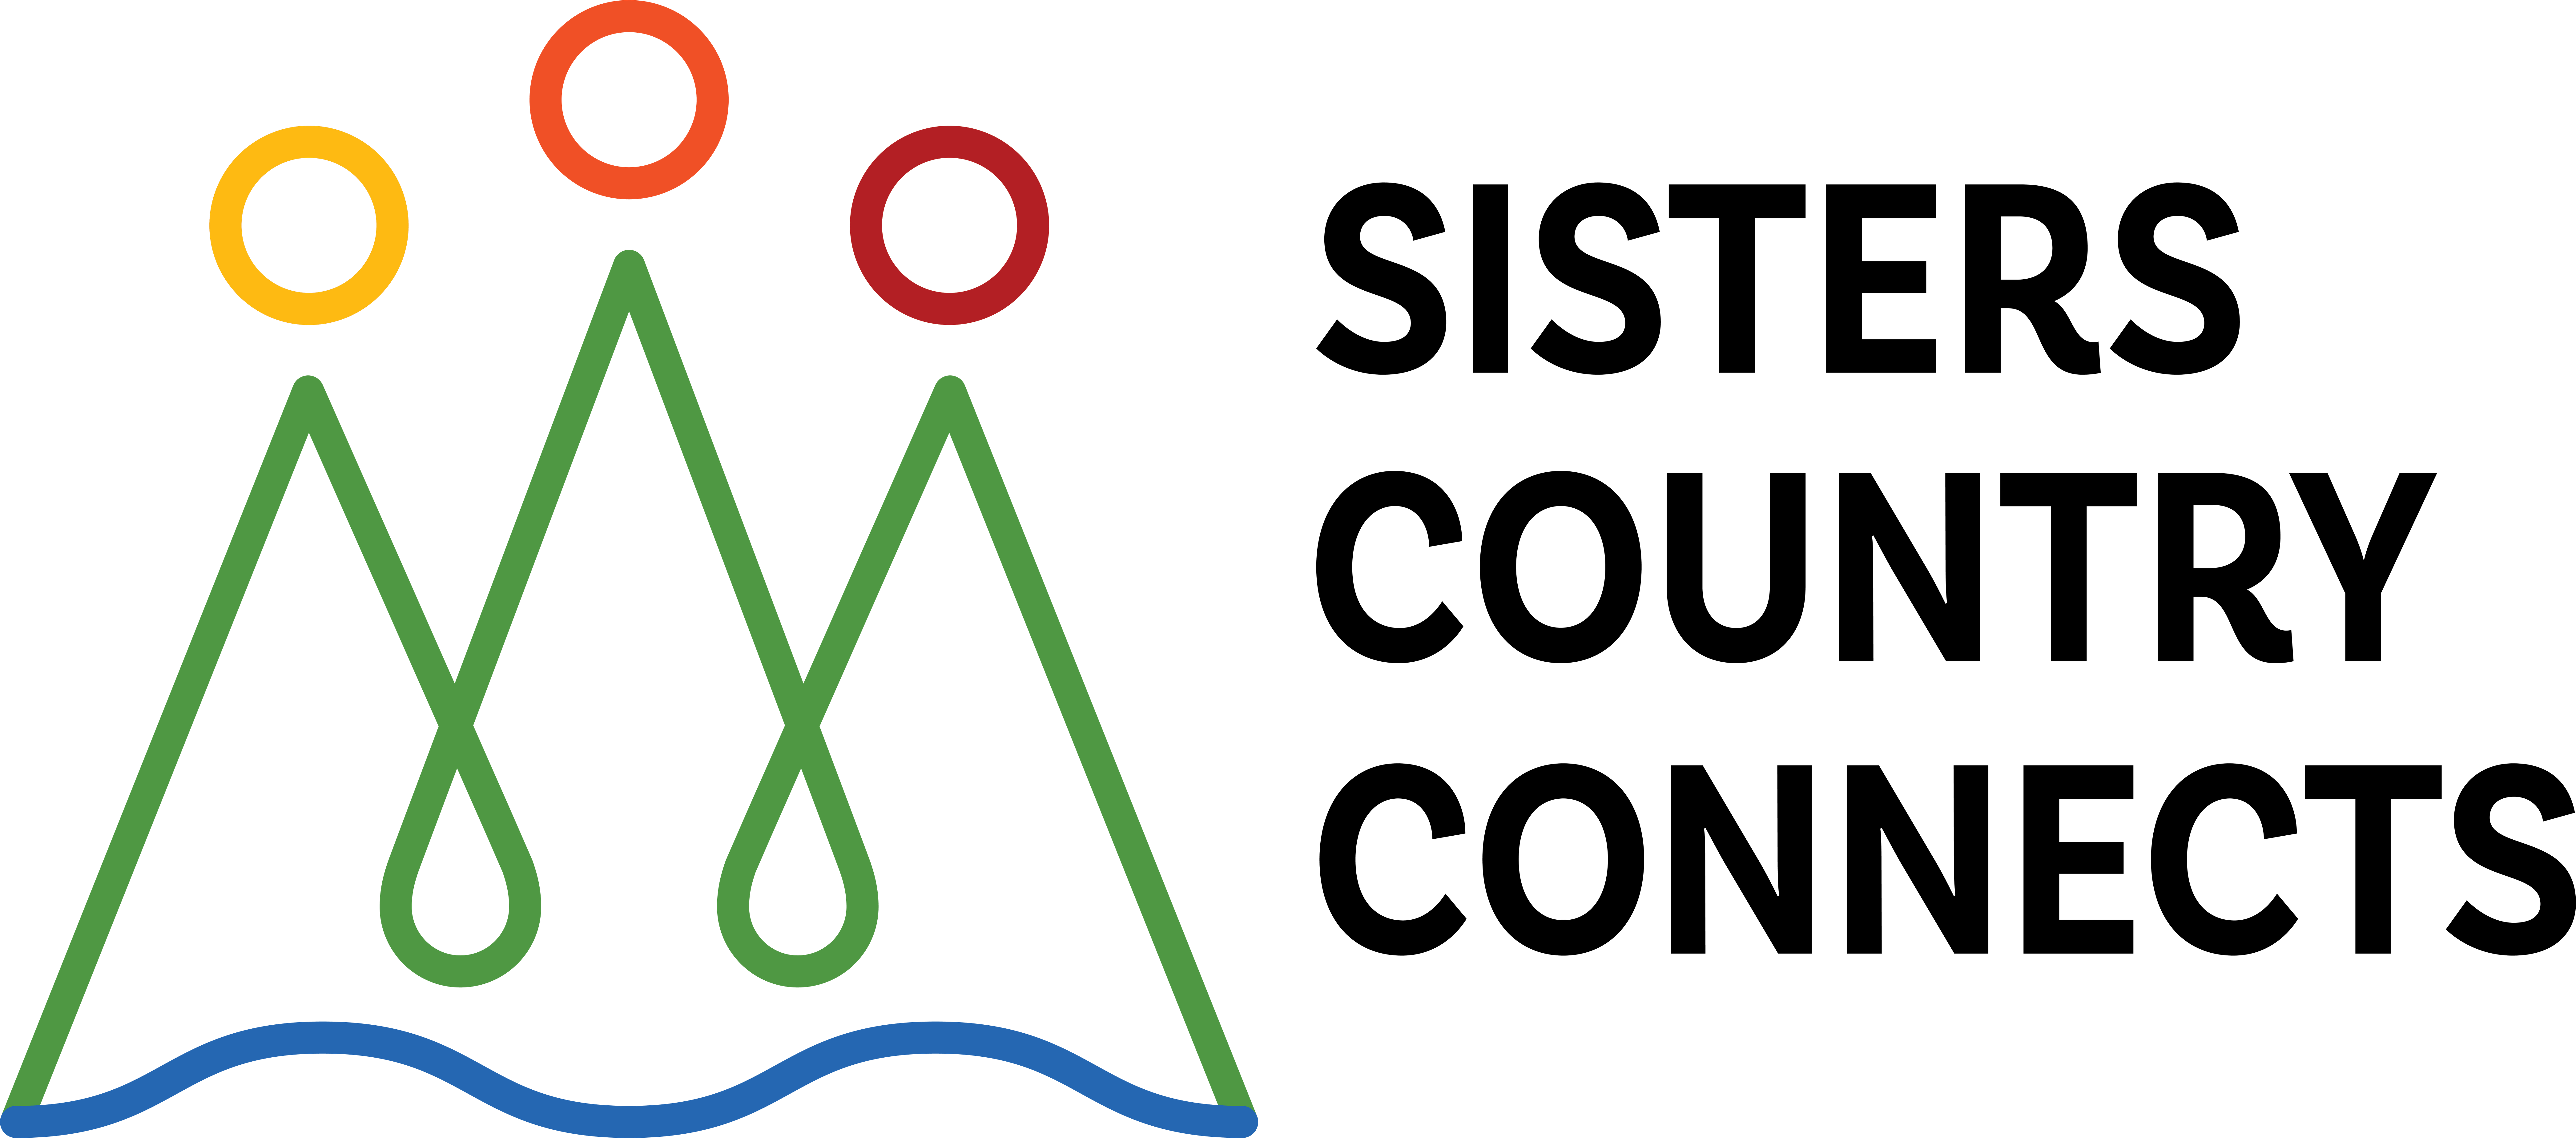 Sisters Country Community Connects